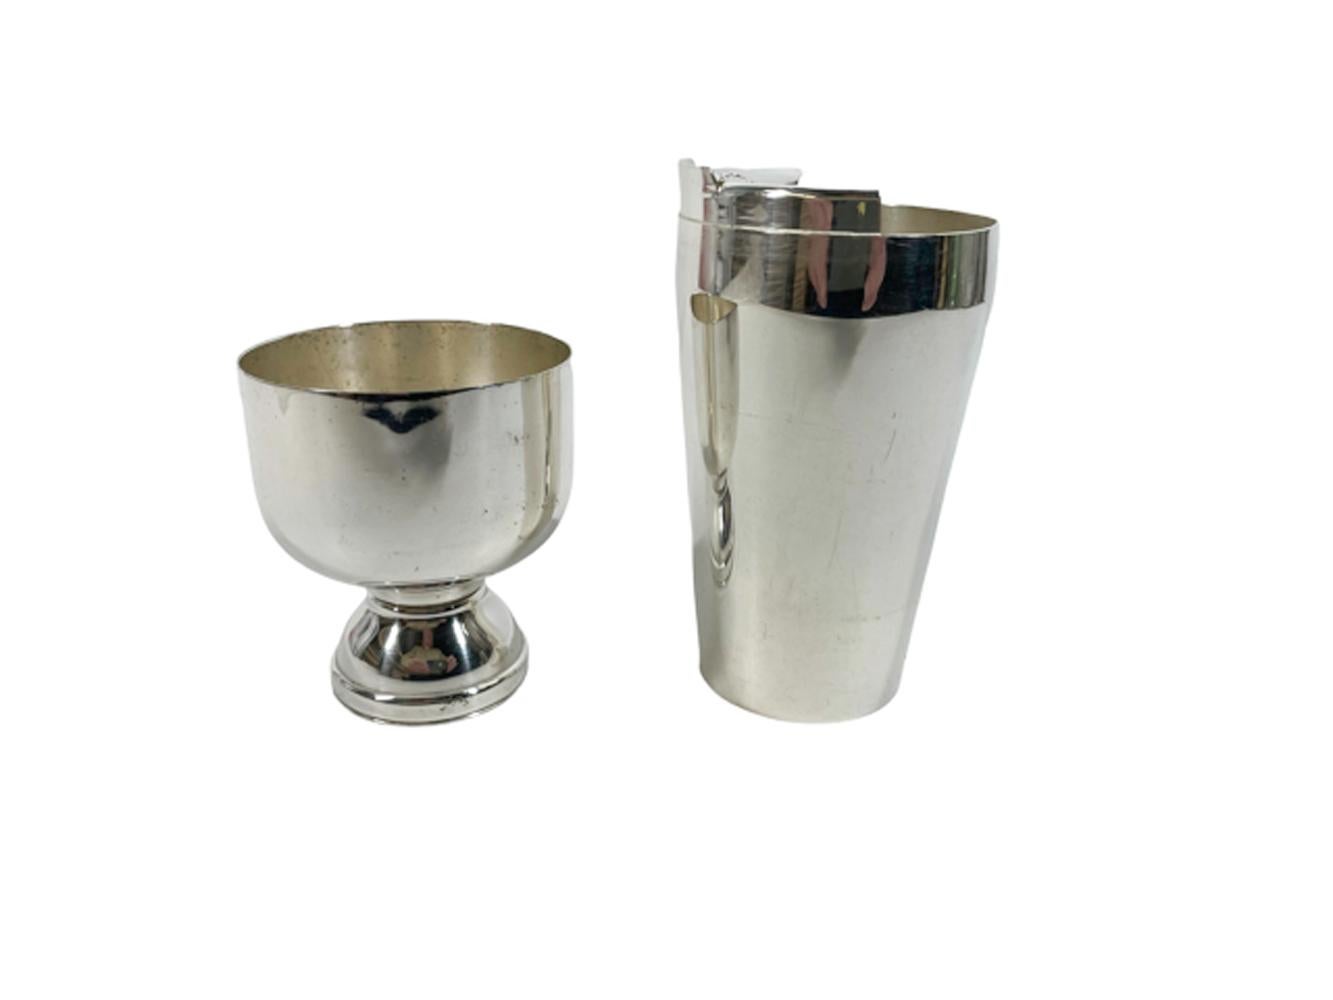 Art Deco Silver Plate Individual Size Cocktail Shaker by Napier In Good Condition For Sale In Nantucket, MA